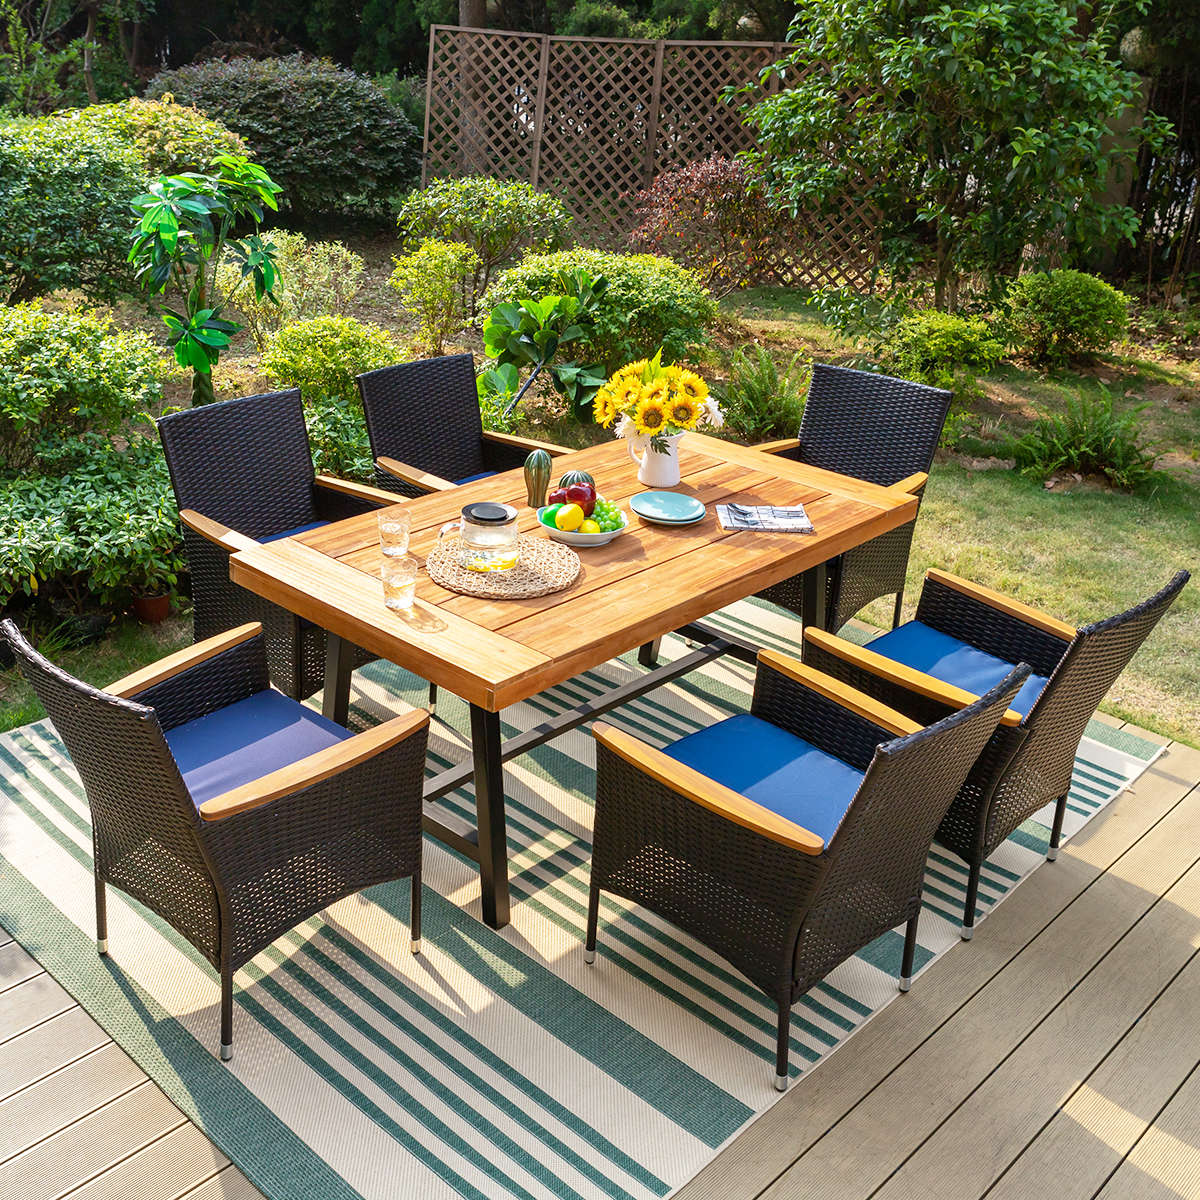 PHI VILLA Acacia Wooden Table & 6 Rattan Cushioned Dining Chairs 7-Piece Outdoor Dining Set